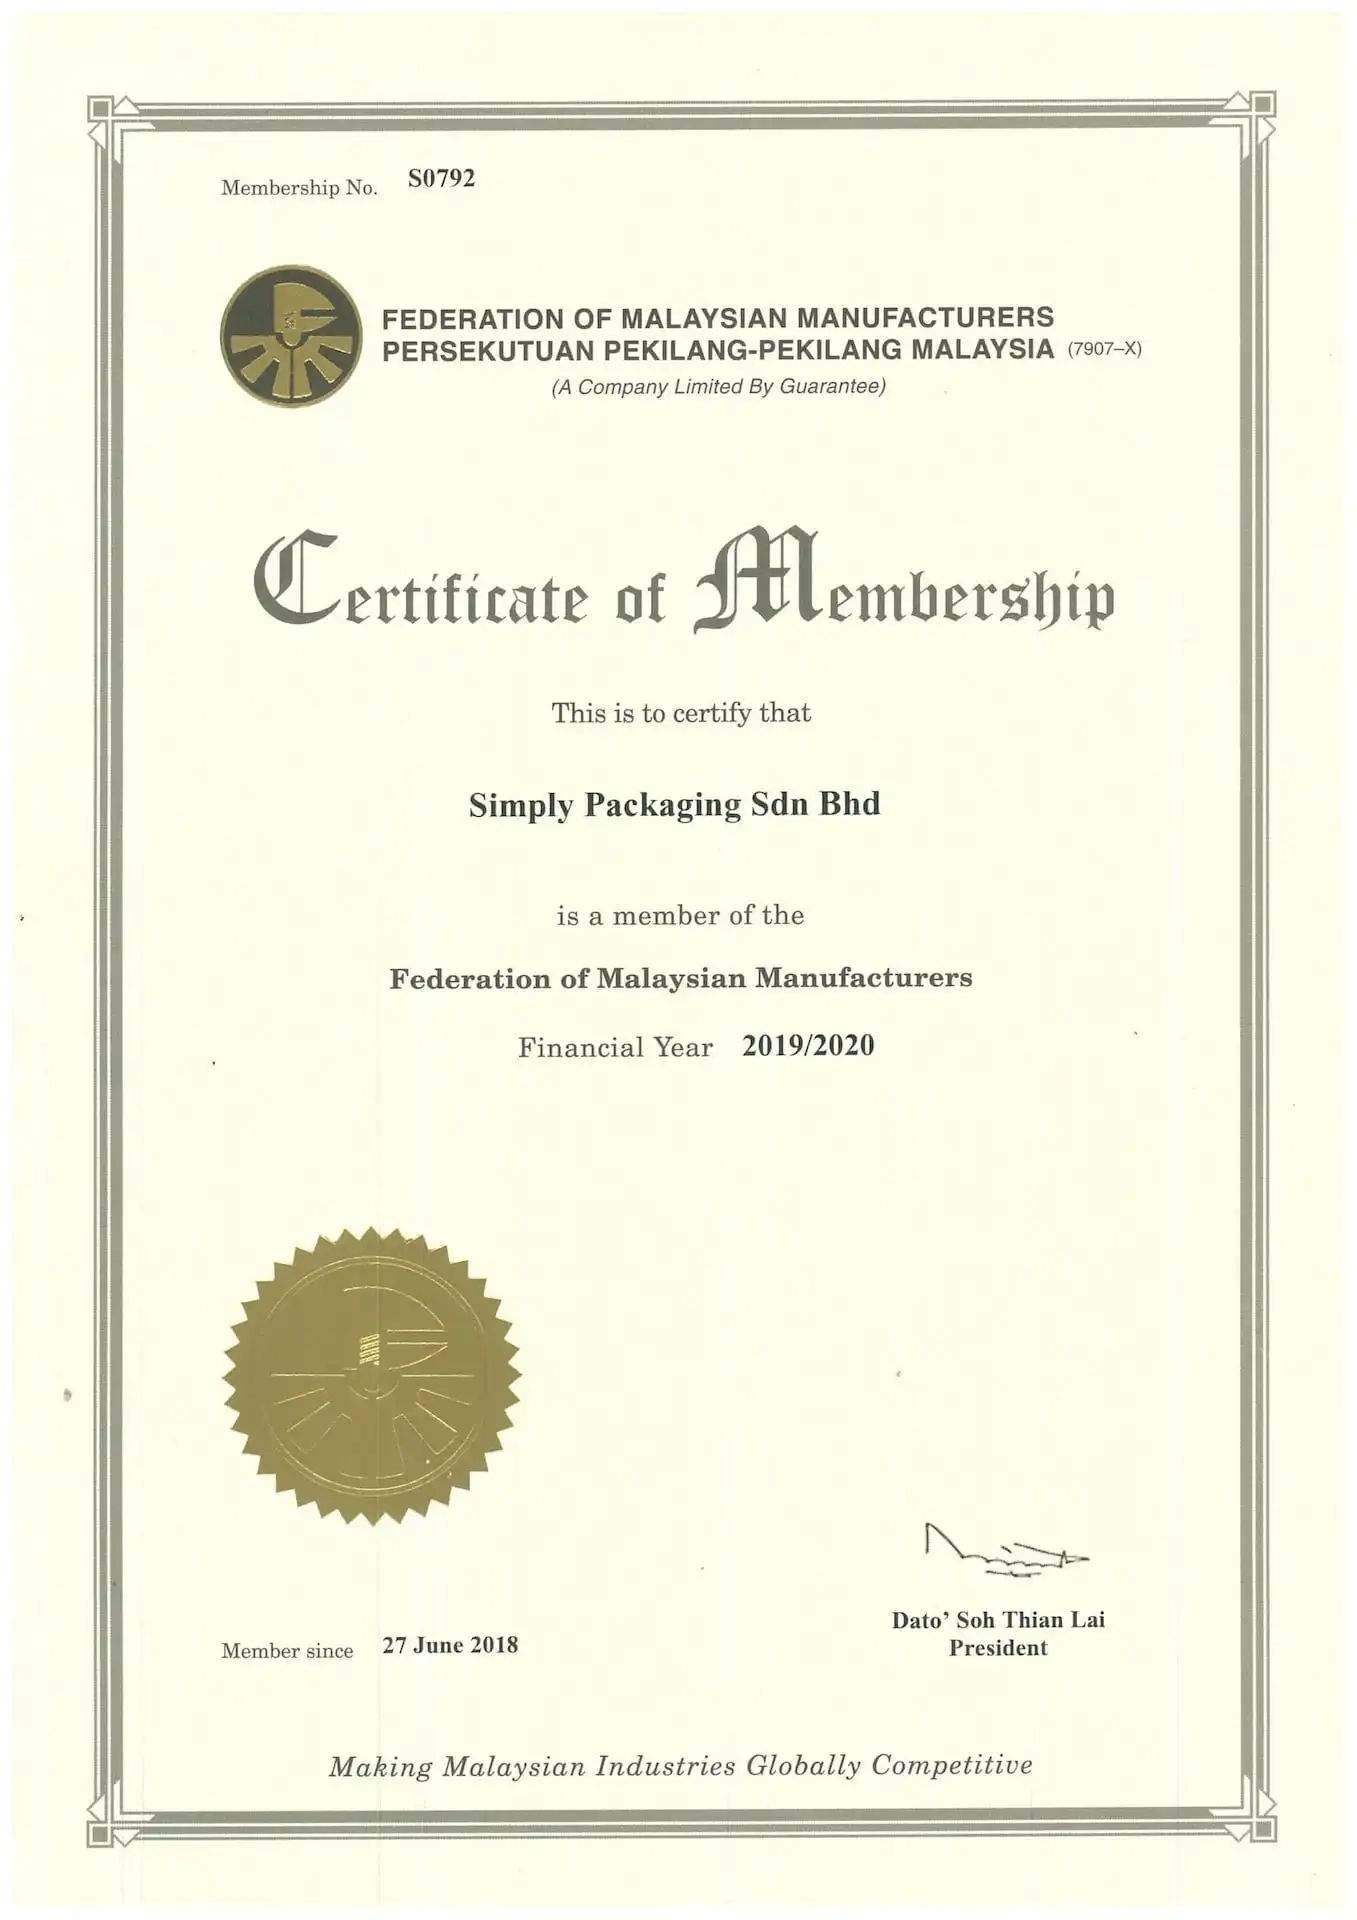 Federation-of-Malaysian-Manufacturers-certificate